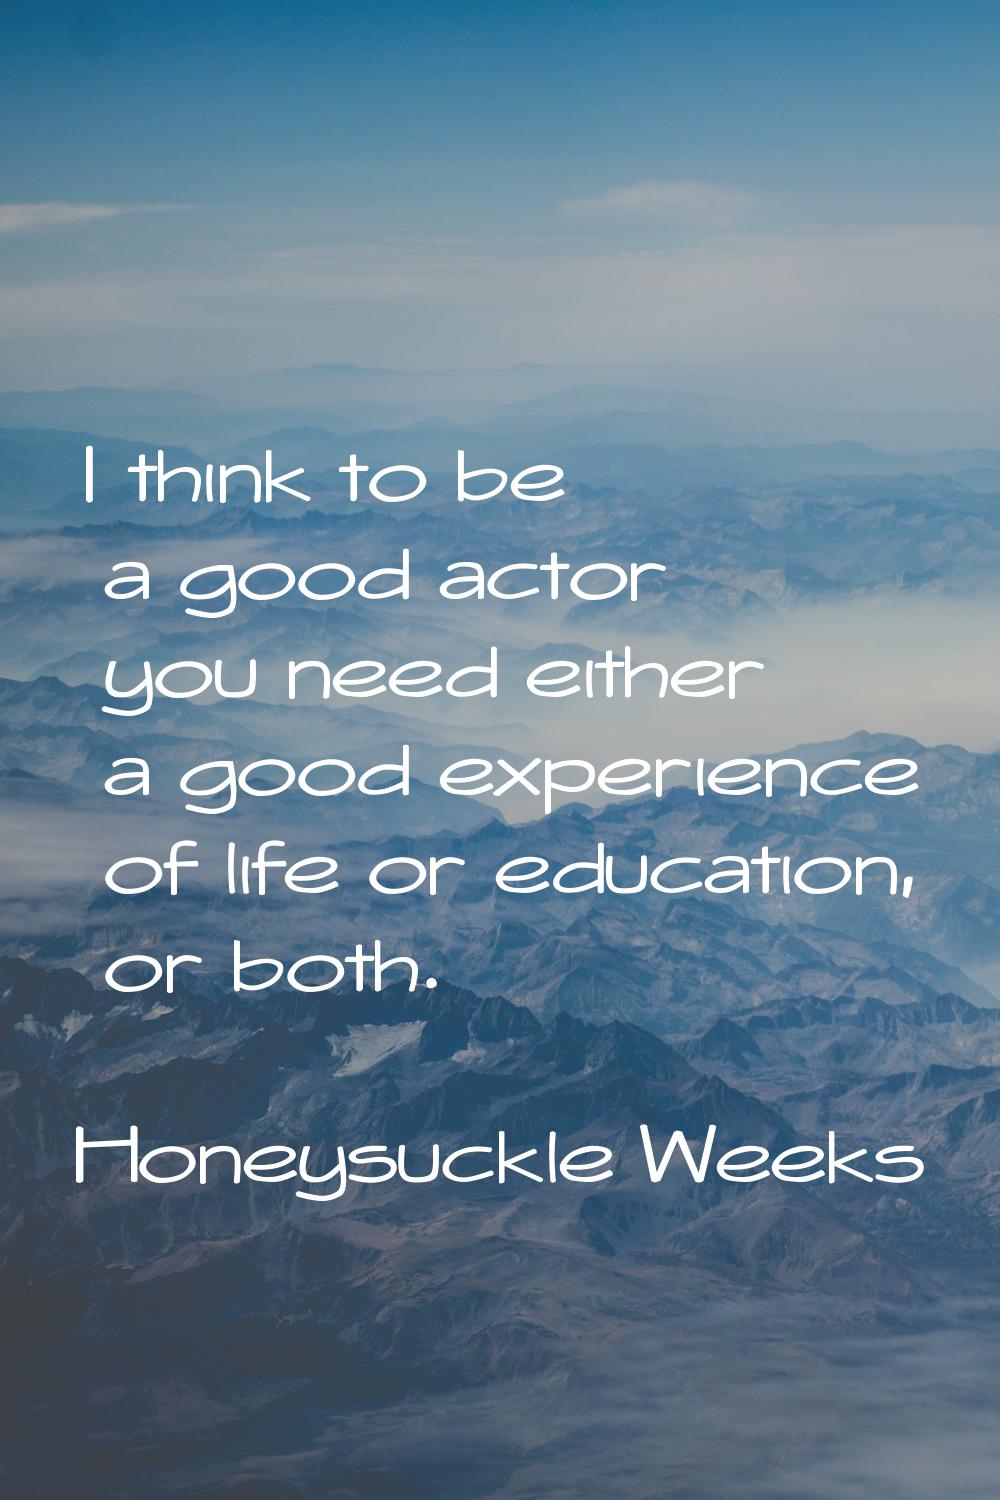 I think to be a good actor you need either a good experience of life or education, or both.